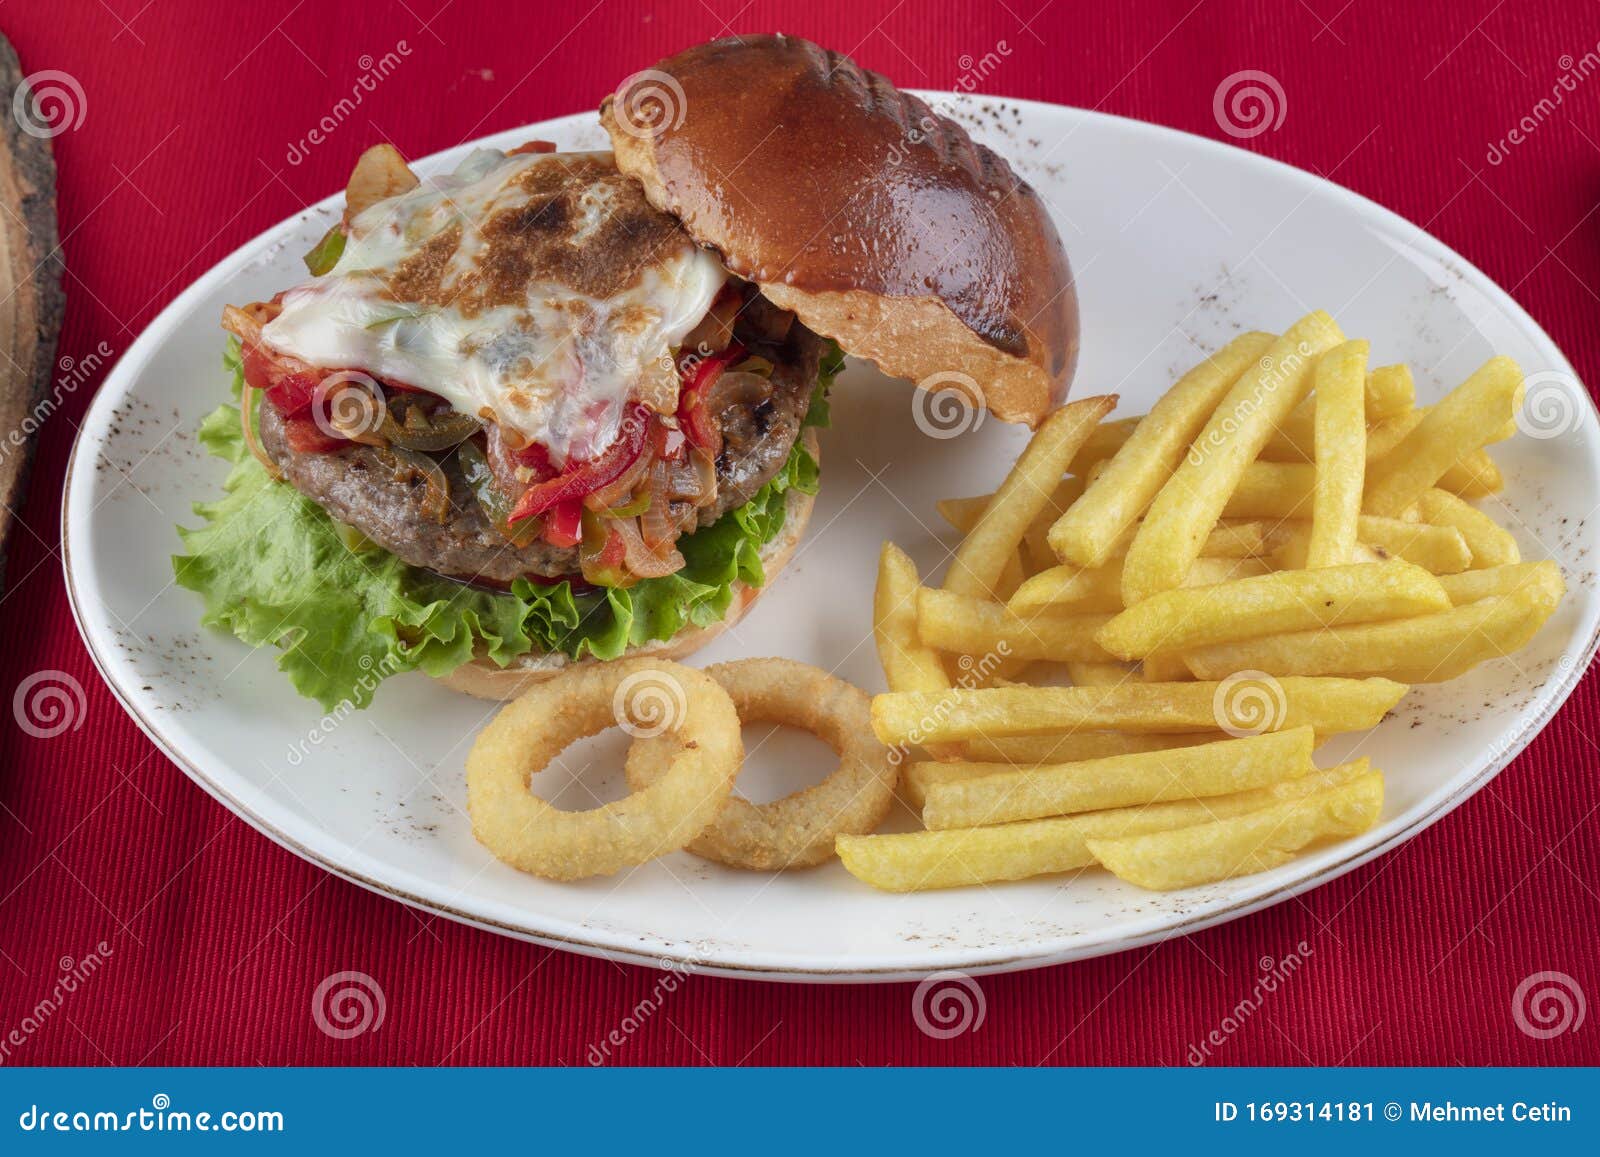 Perfect Hamburger Classic Burger American Cheeseburger With Cheese Mushroom Tomato And Lettuce Stock Image Image Of Cheese Lettuce 169314181